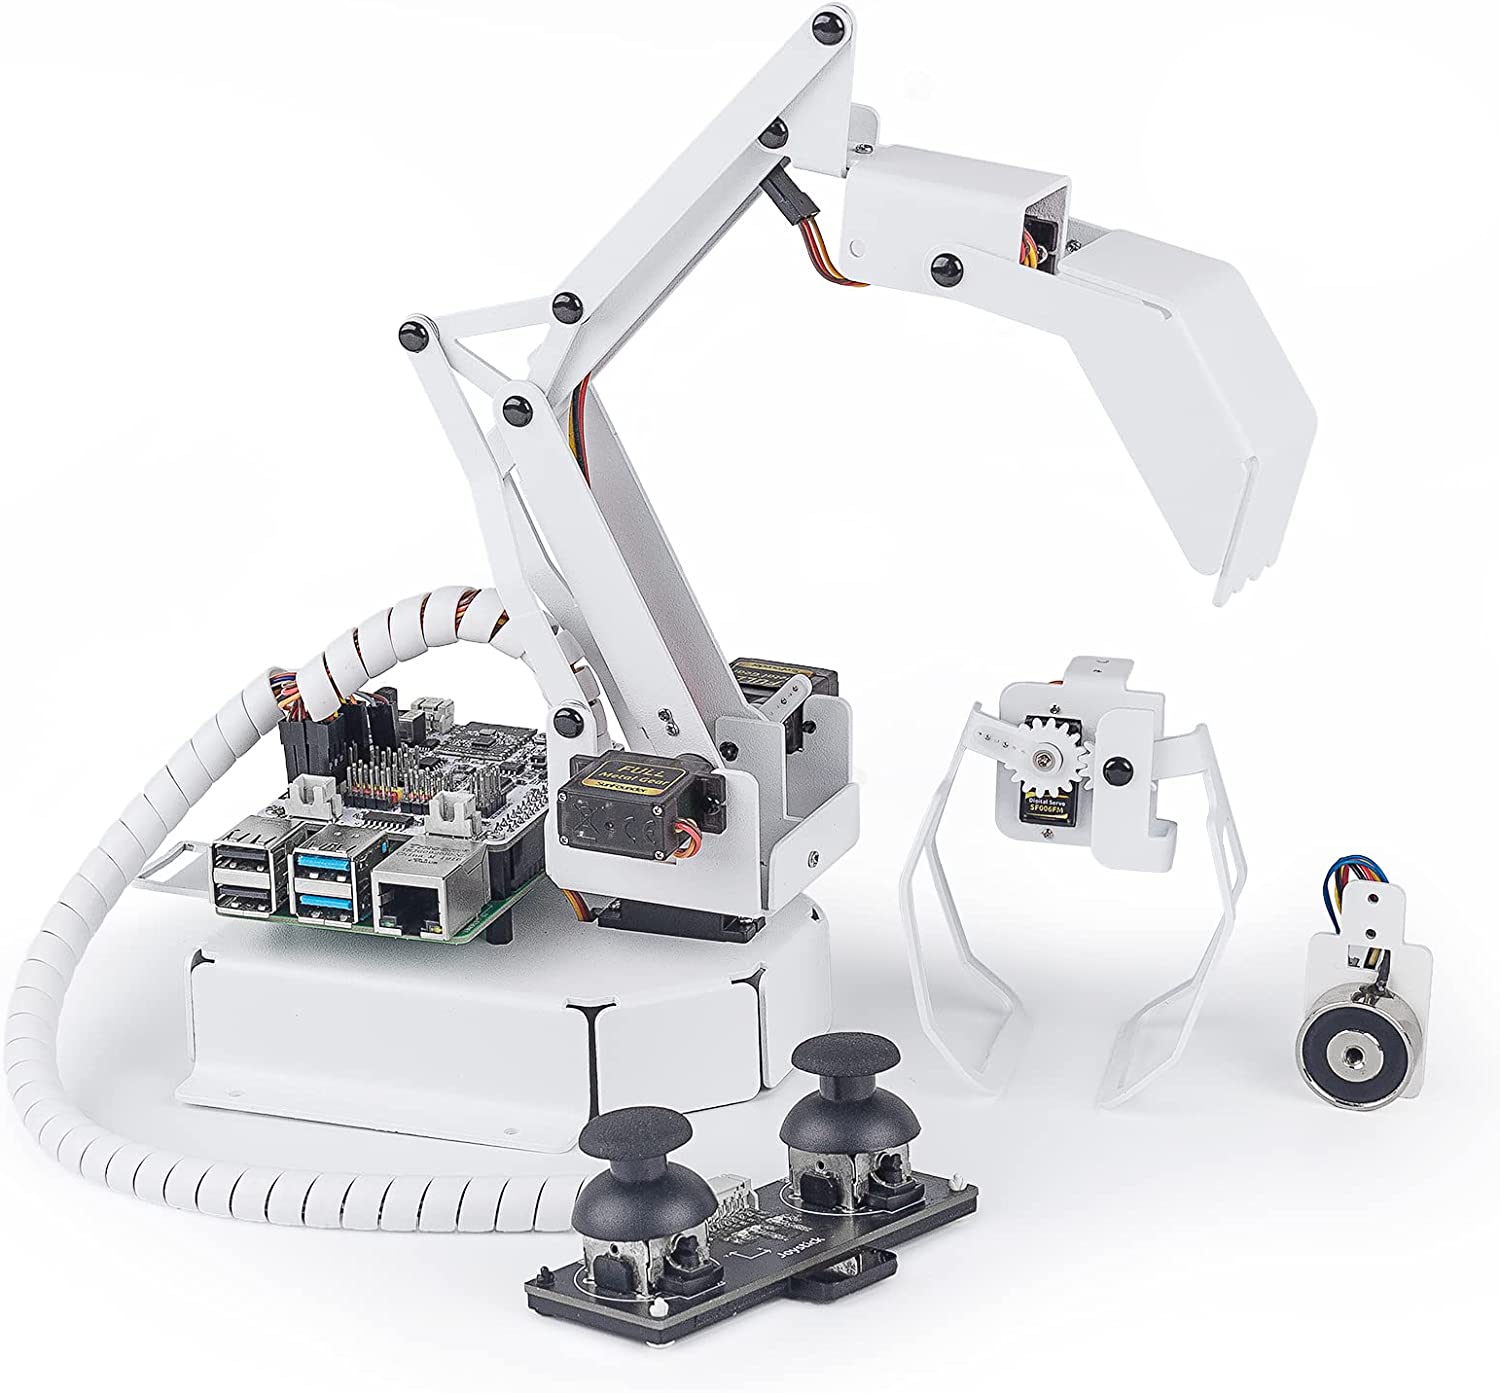 SunFounder-4-DOF-Robot-Arm-Kit-for-Raspberry-Pi-Support-Graphical-Visual-Programming-Python-Remote-Control.jpg